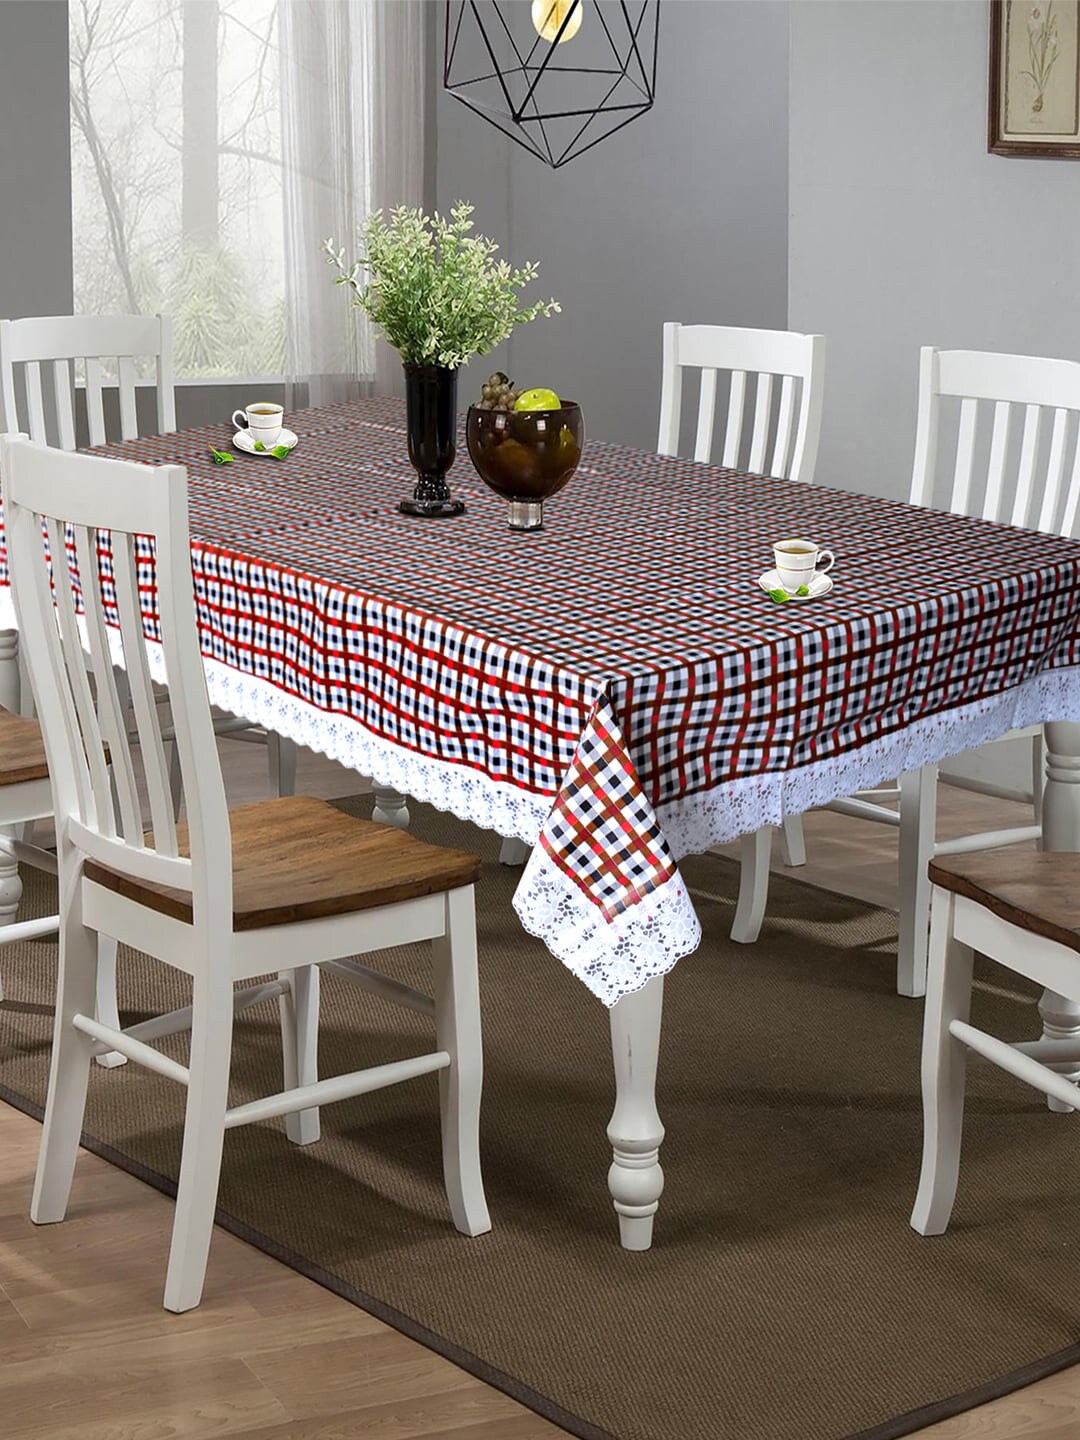 Kuber Industries Maroon & White Printed 6-Seater Table Cover Price in India